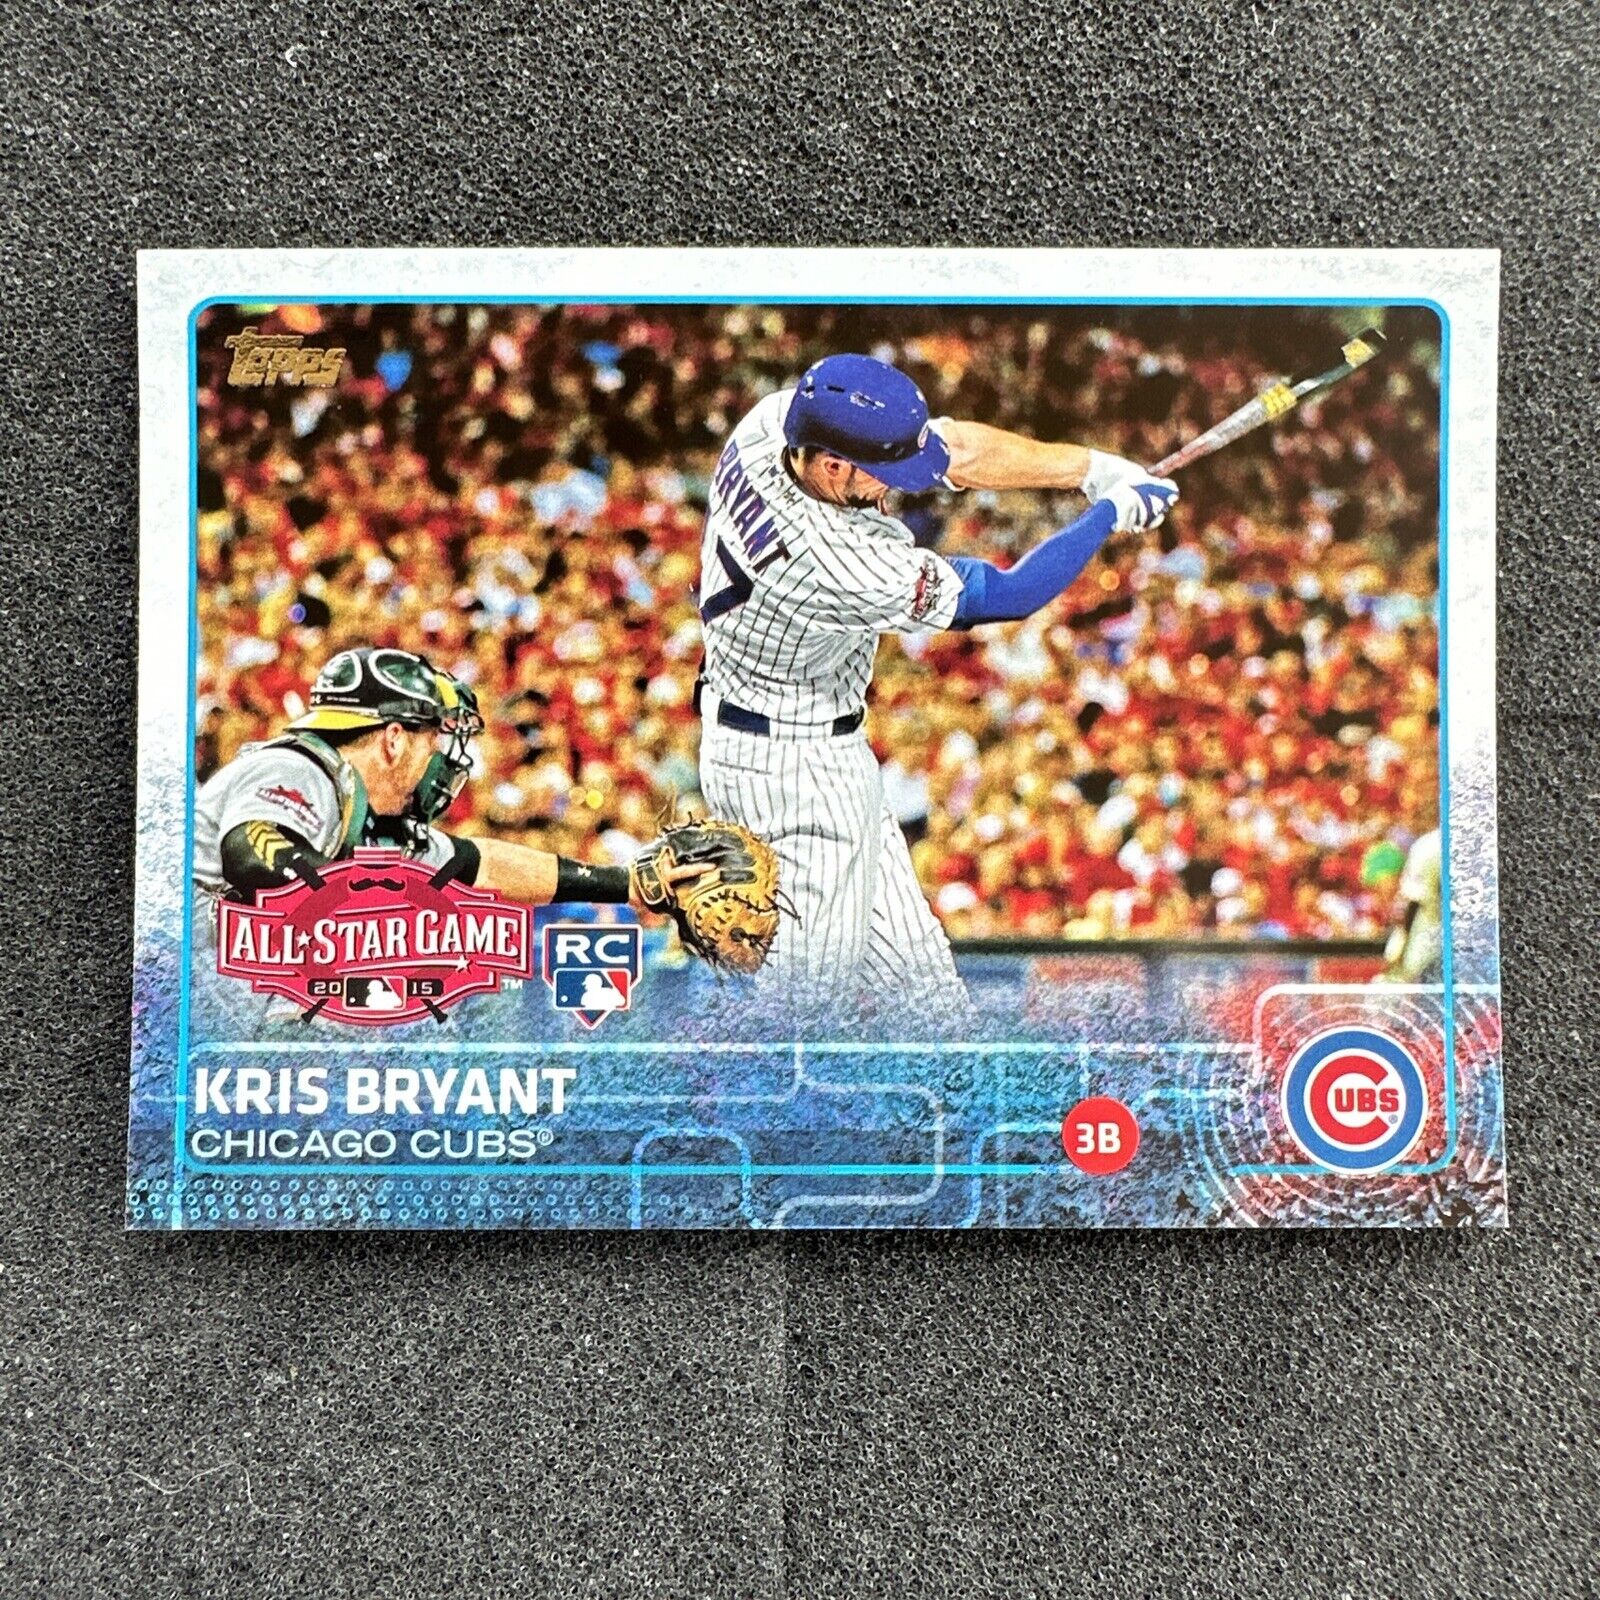 2015 Topps Update KRIS BRYANT RC Rookie Card #US242 Chicago Cubs QTY